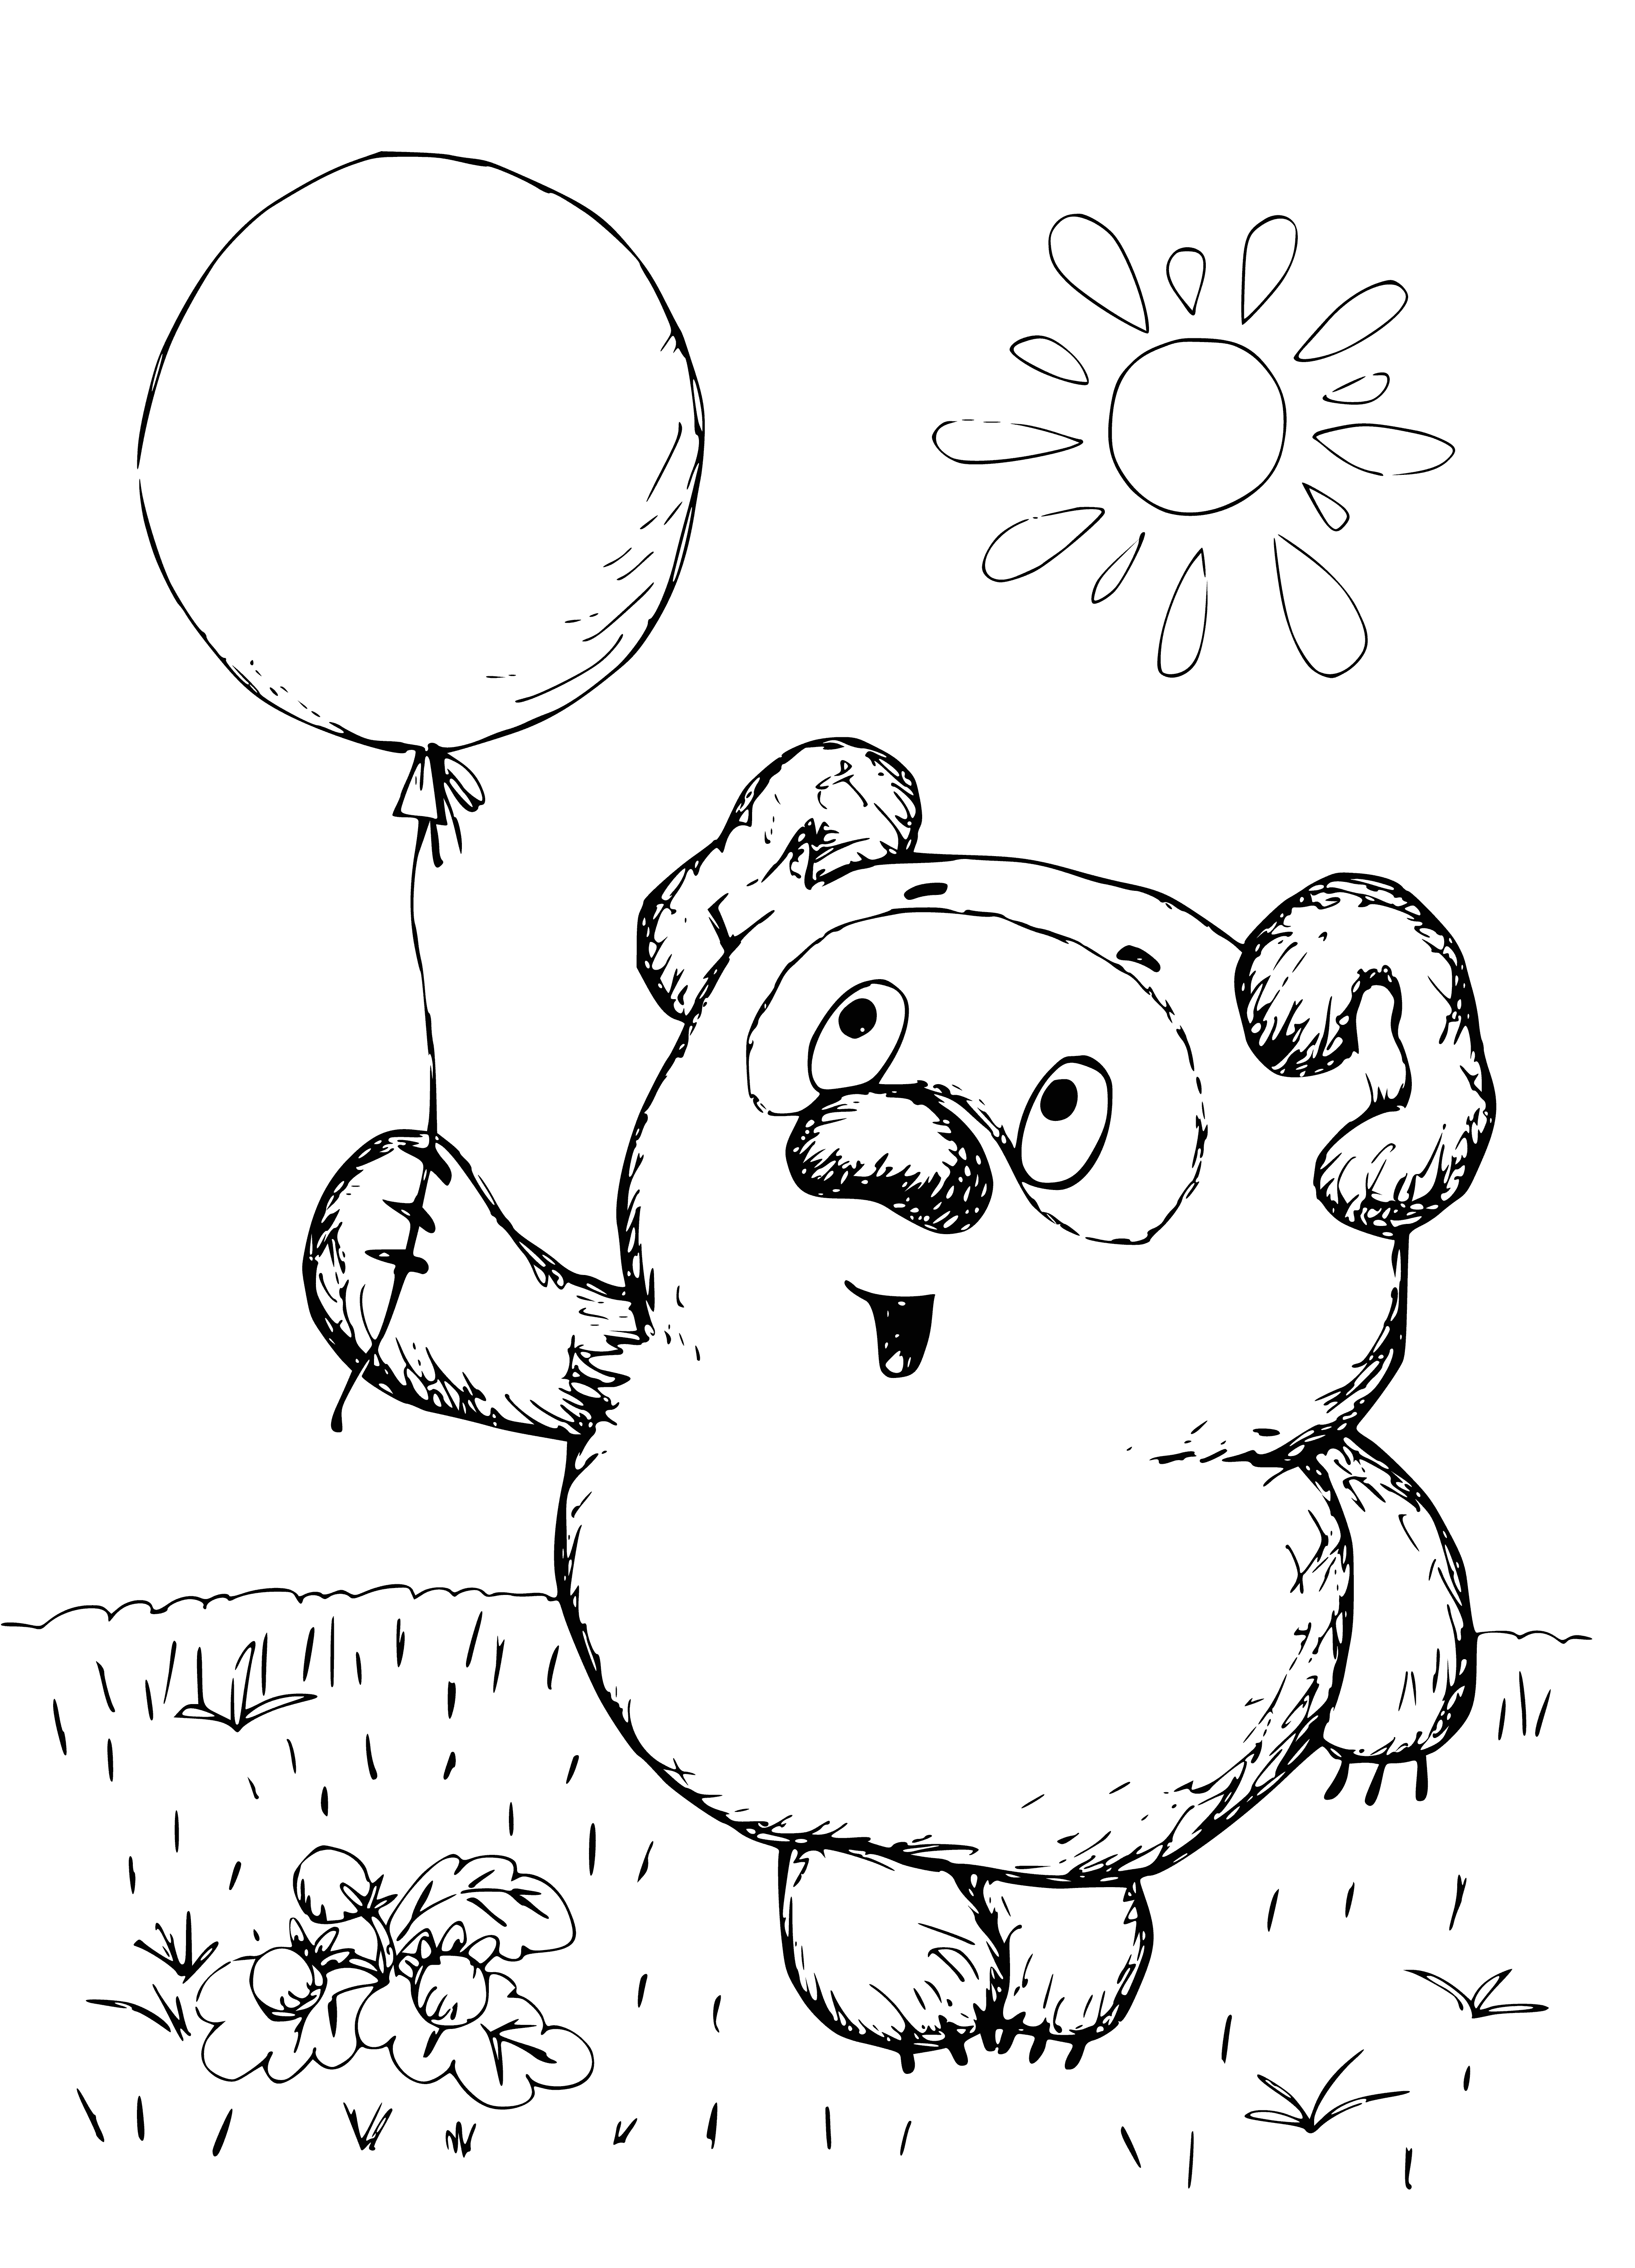 coloring page: Pooh joyfully holds a big red balloon with a yellow ribbon, smiling up at it.